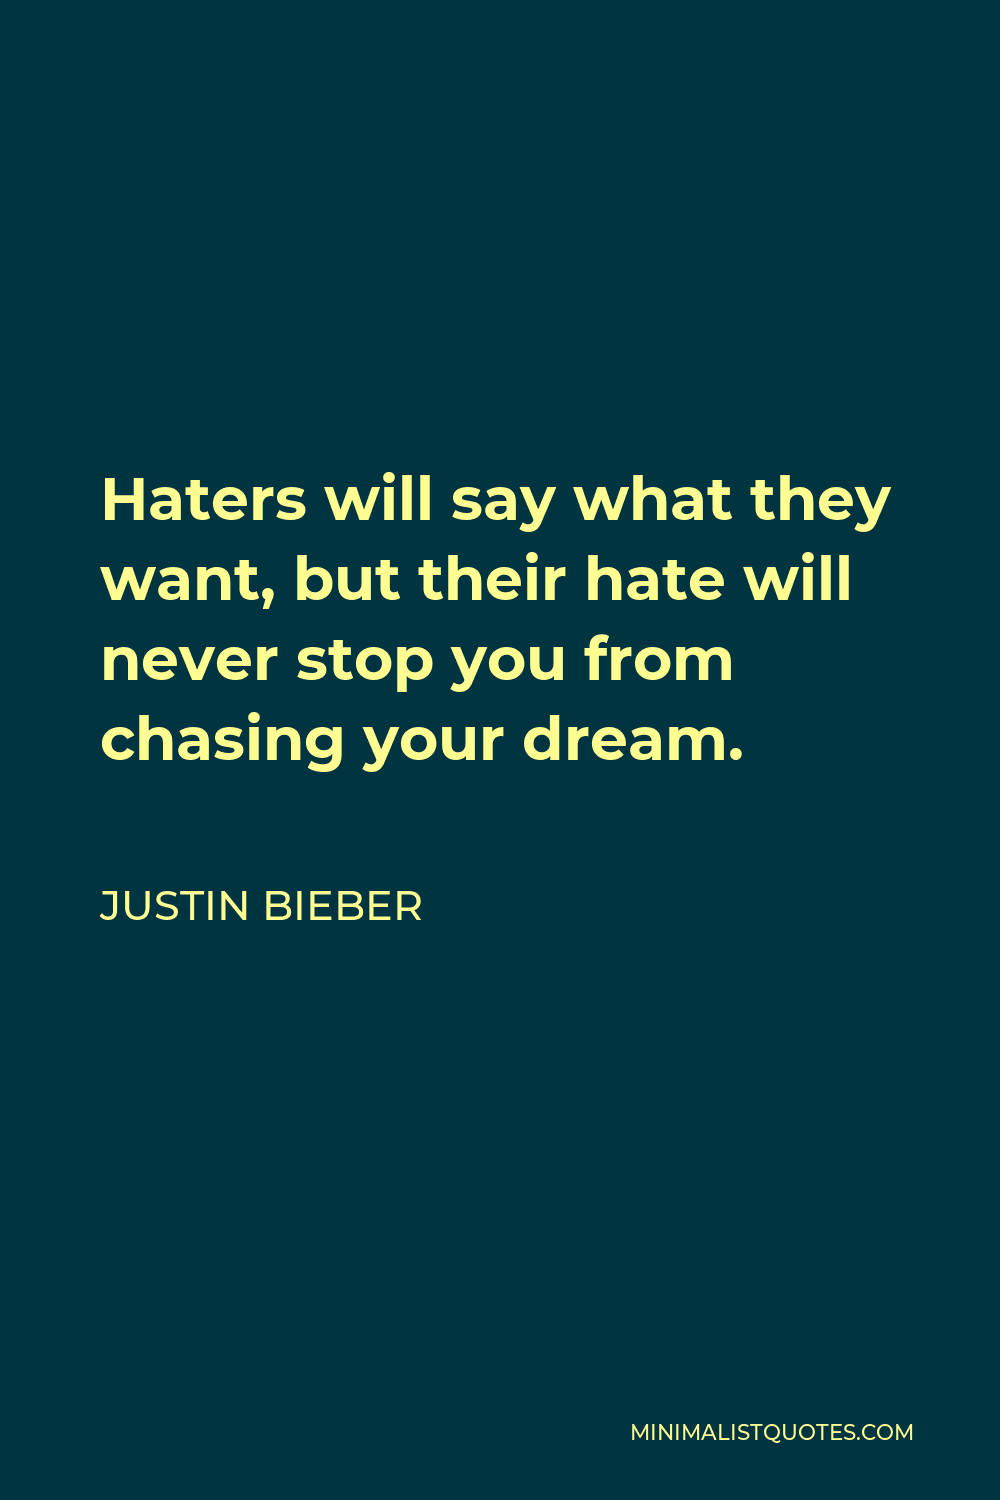 Justin Bieber Quote - Haters will say what they want, but their hate will never stop you from chasing your dream.